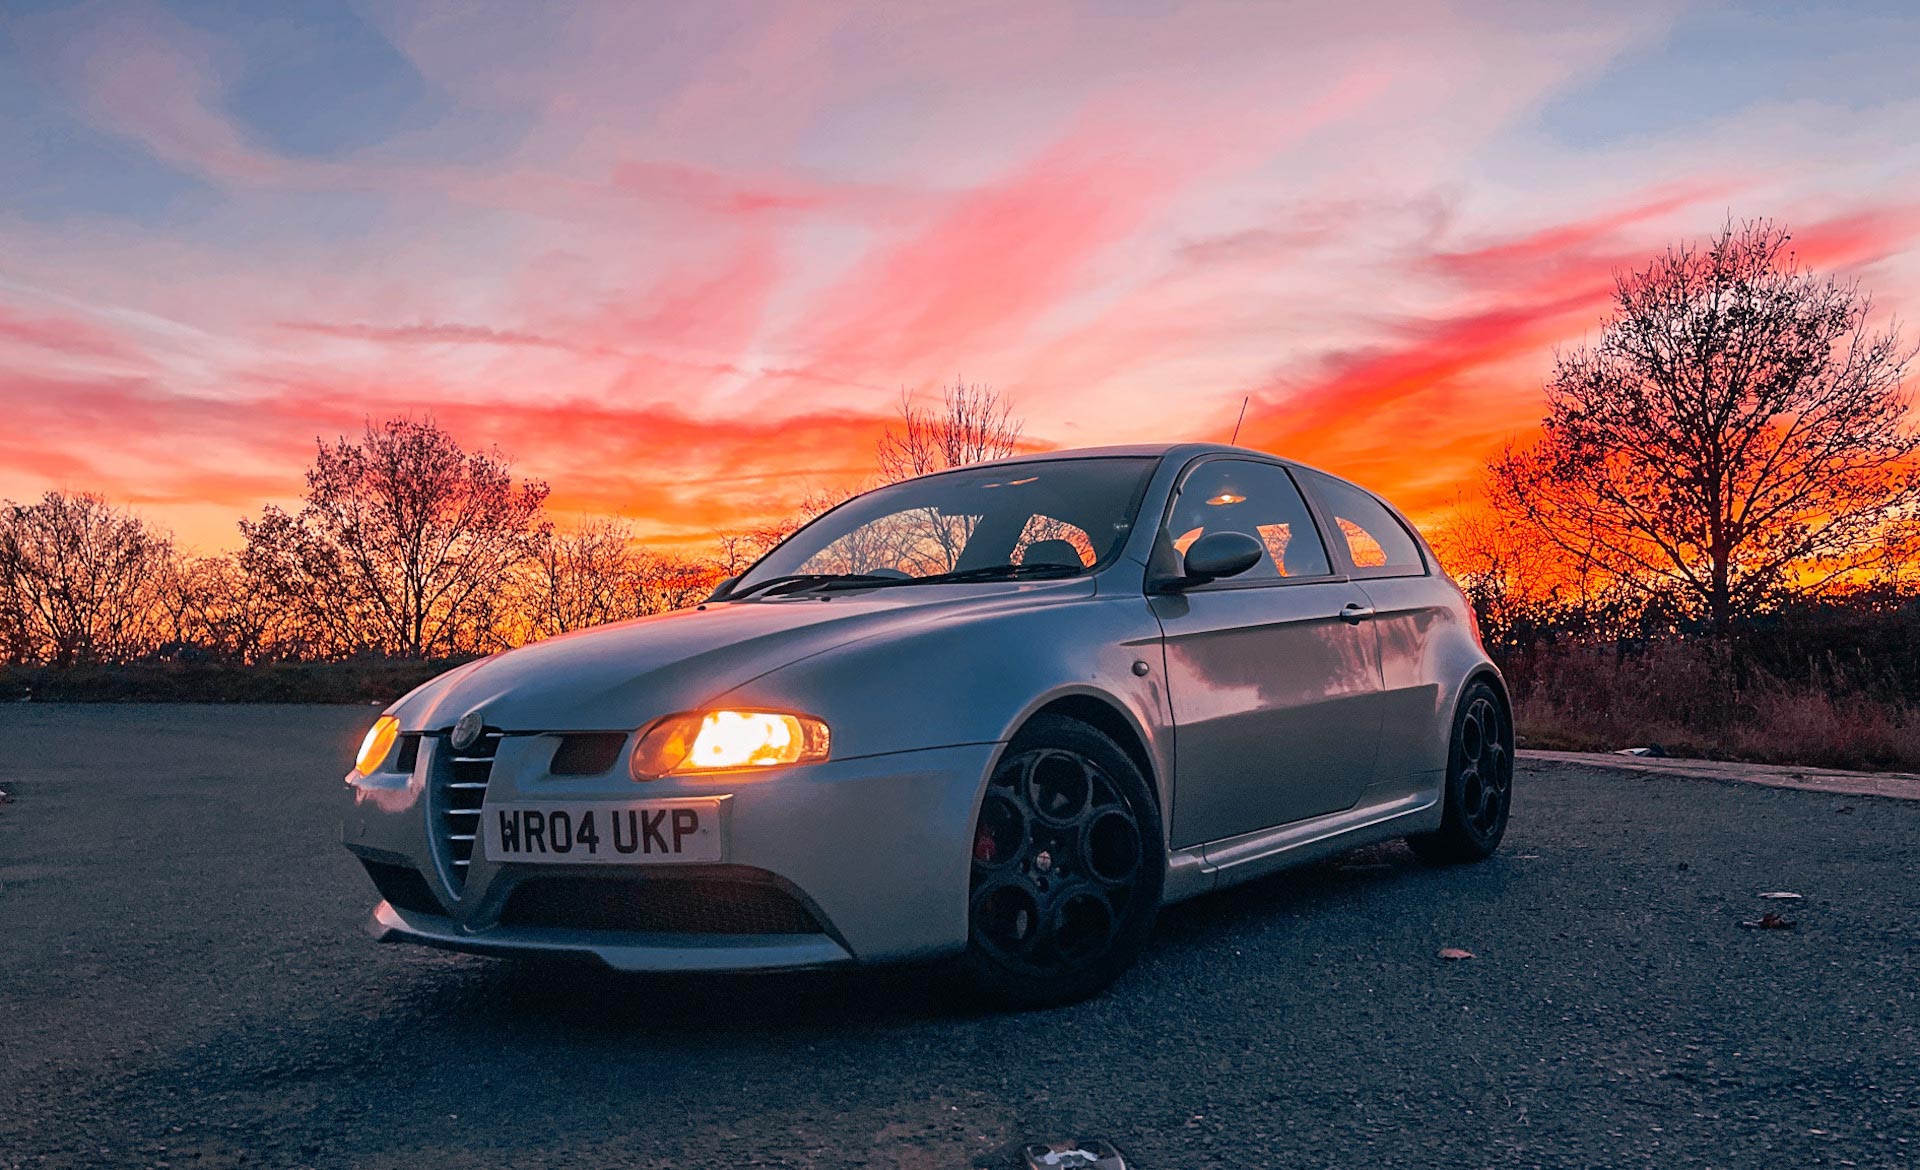 The Awesome Alfa Romeo 147 GTA. The hottest of the hot hatchbacks